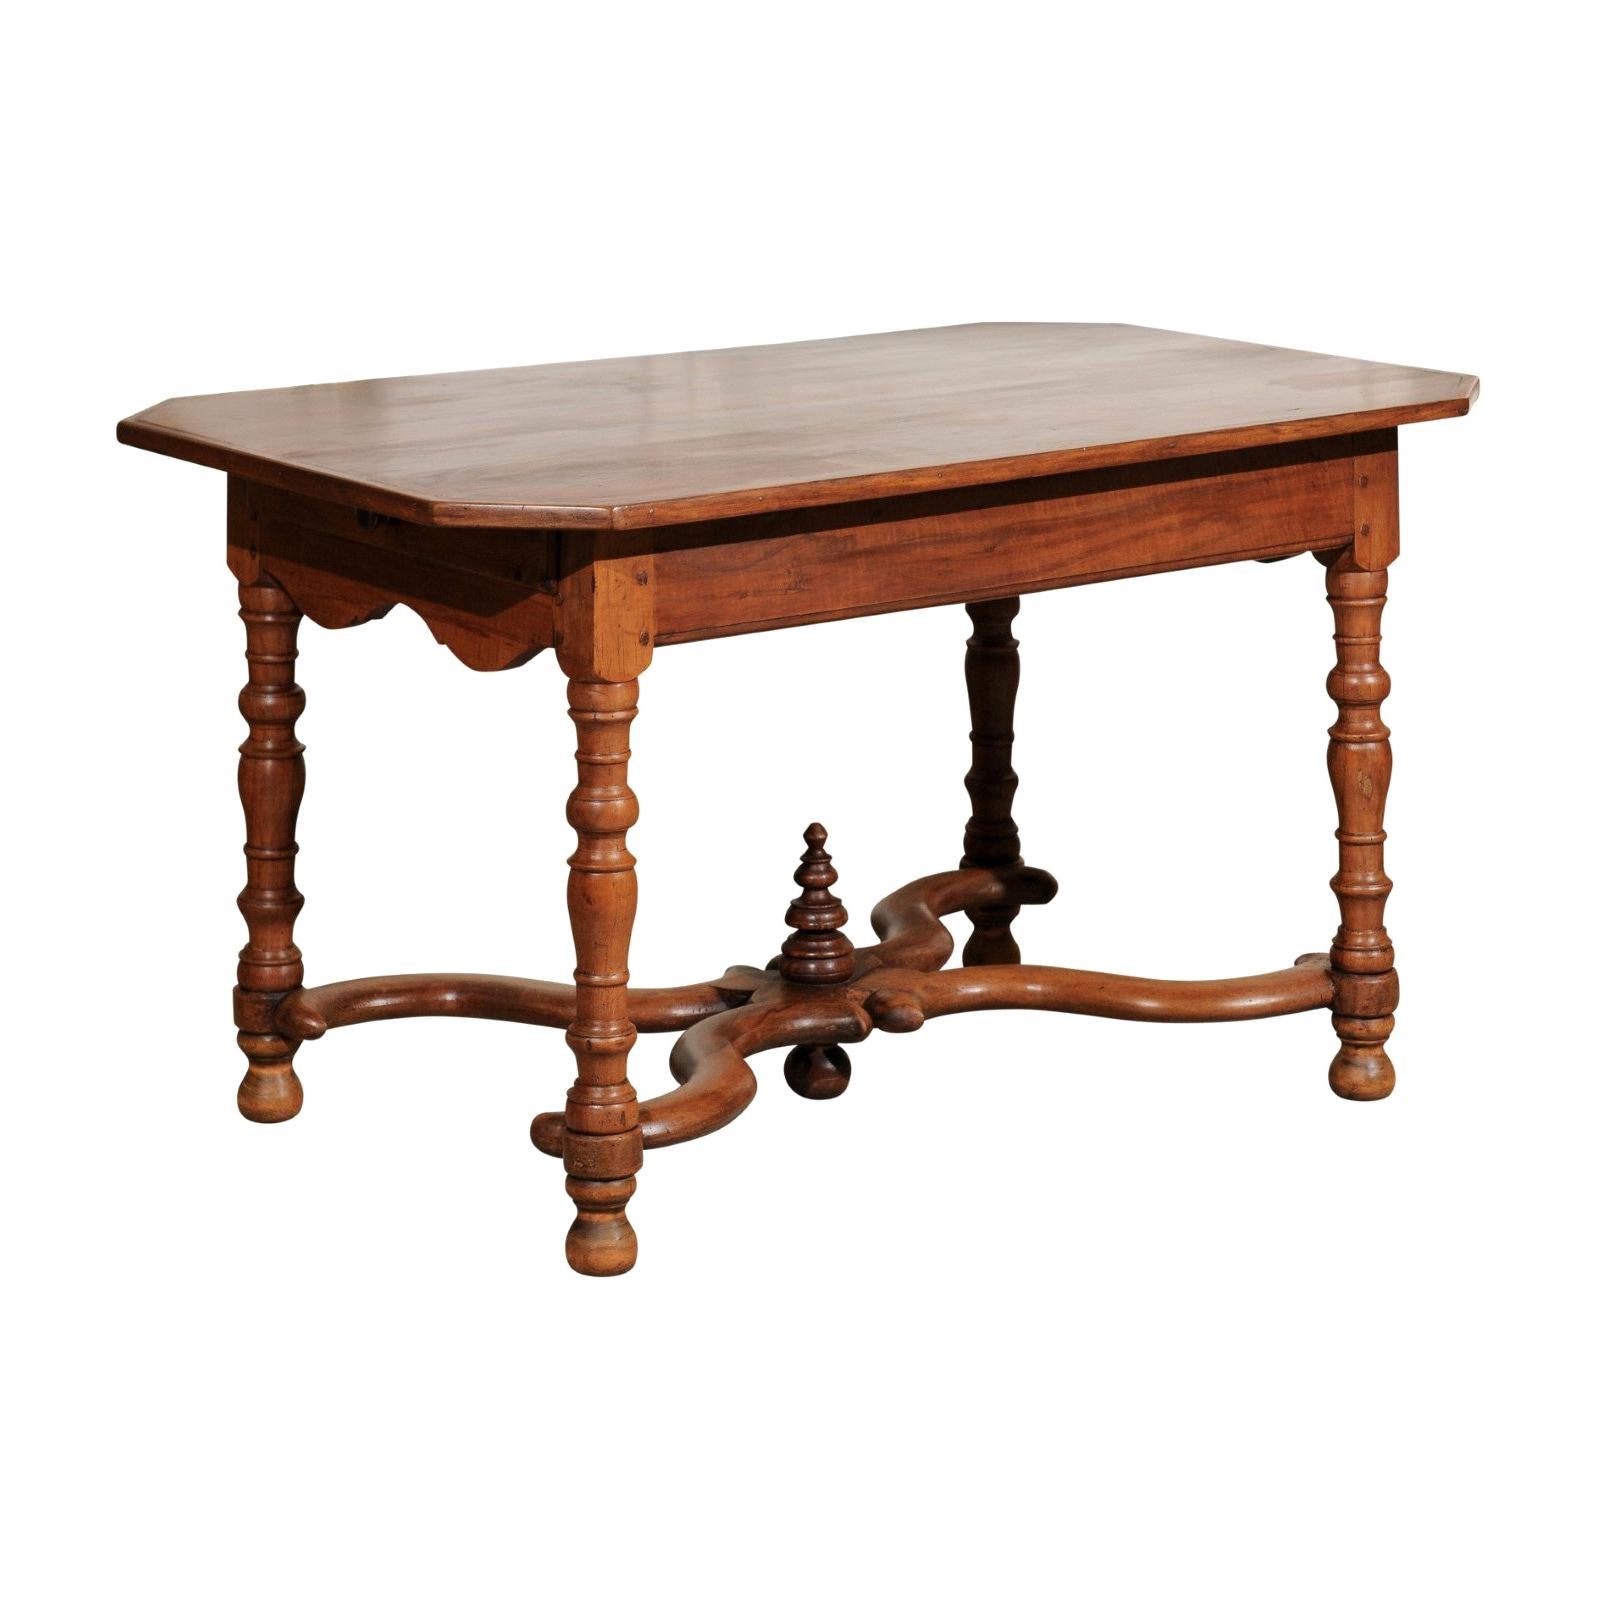 French 18th Century Walnut Side Table with Drawers and X-Form Cross Stretcher